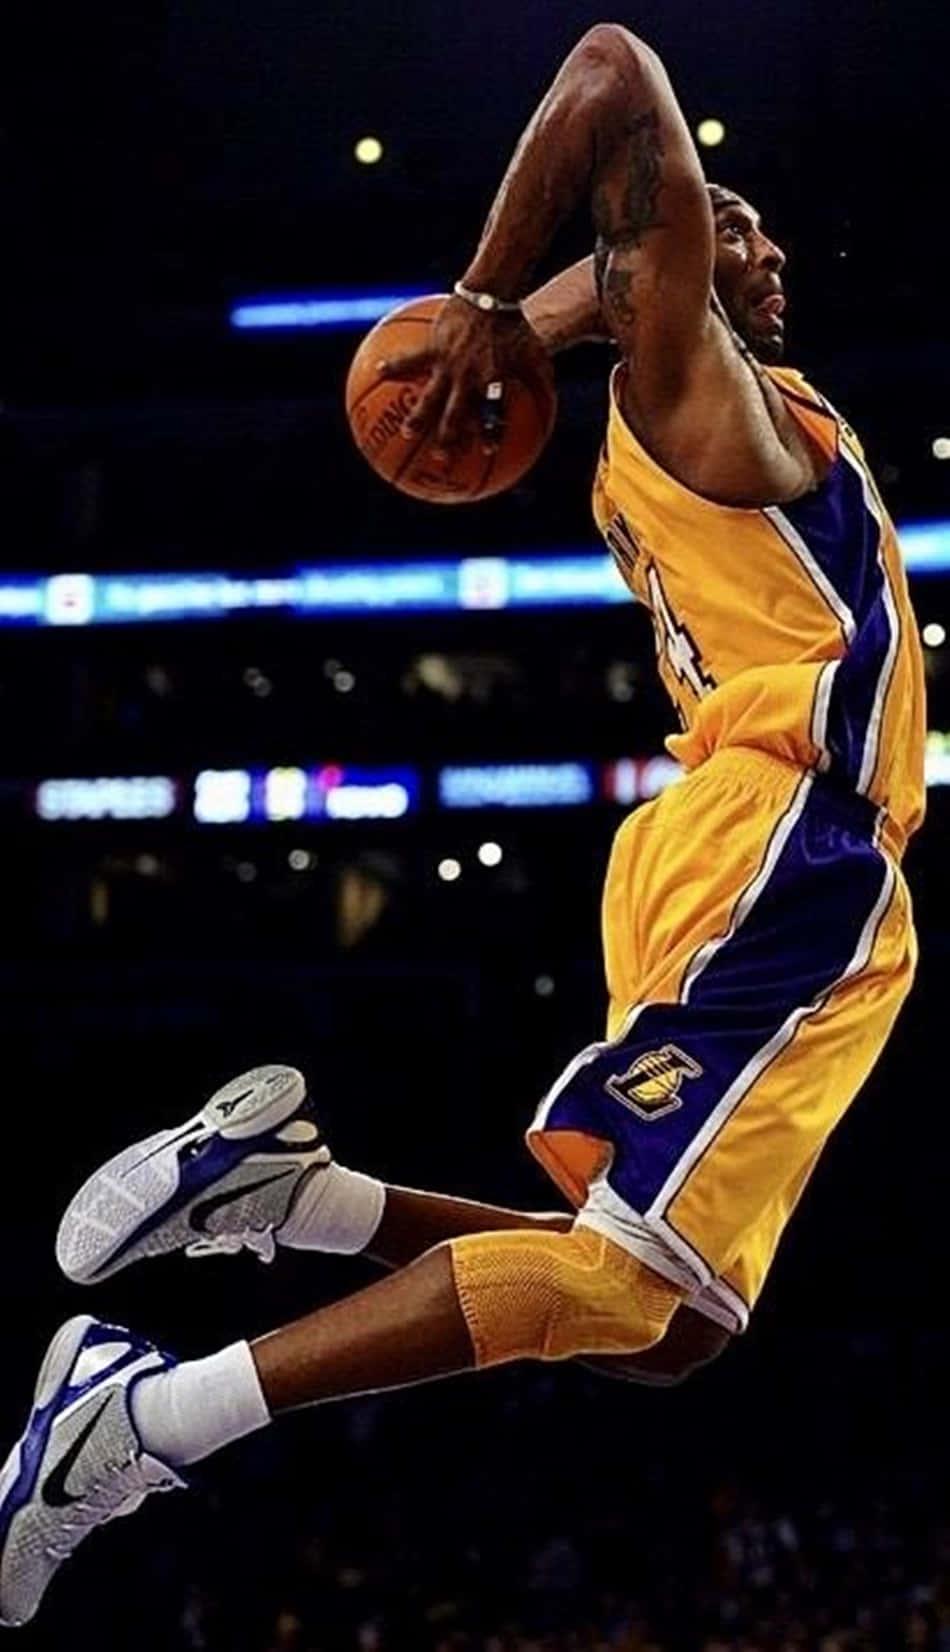 Kobe Bryant Showing Off His Impressive Dunking Abilities